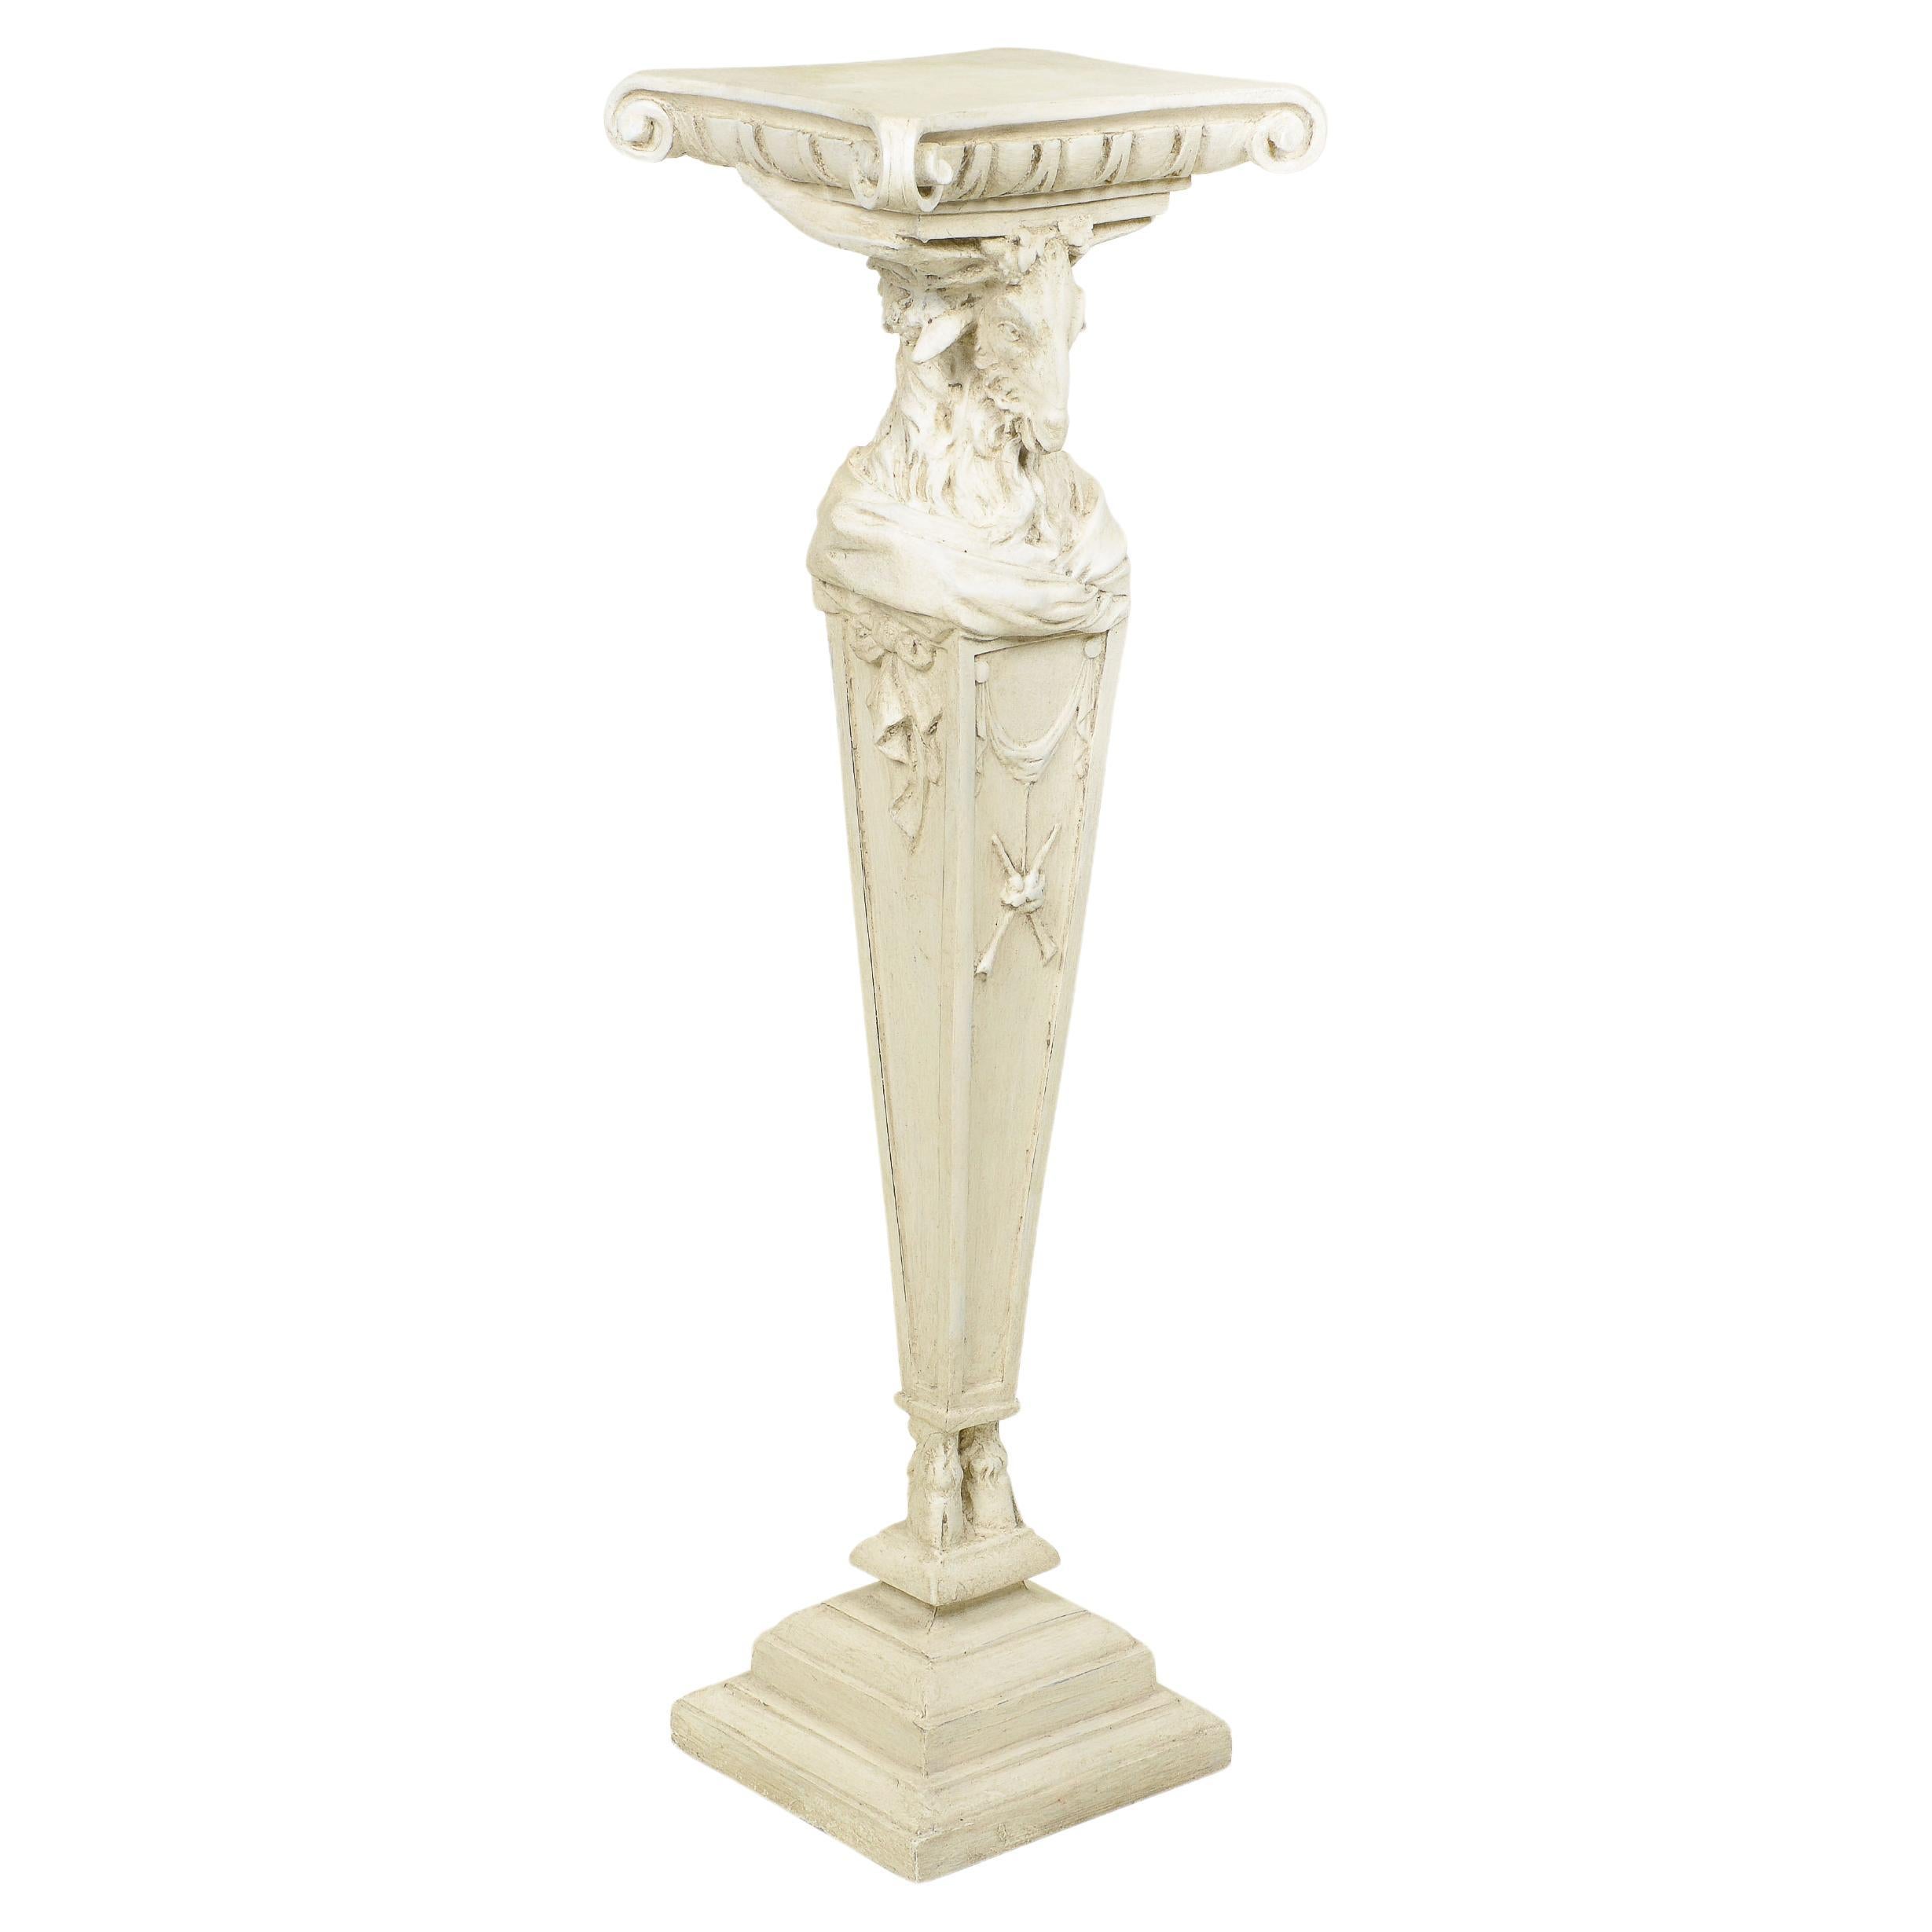 A Neoclassical White-Painted Carved Pedestal